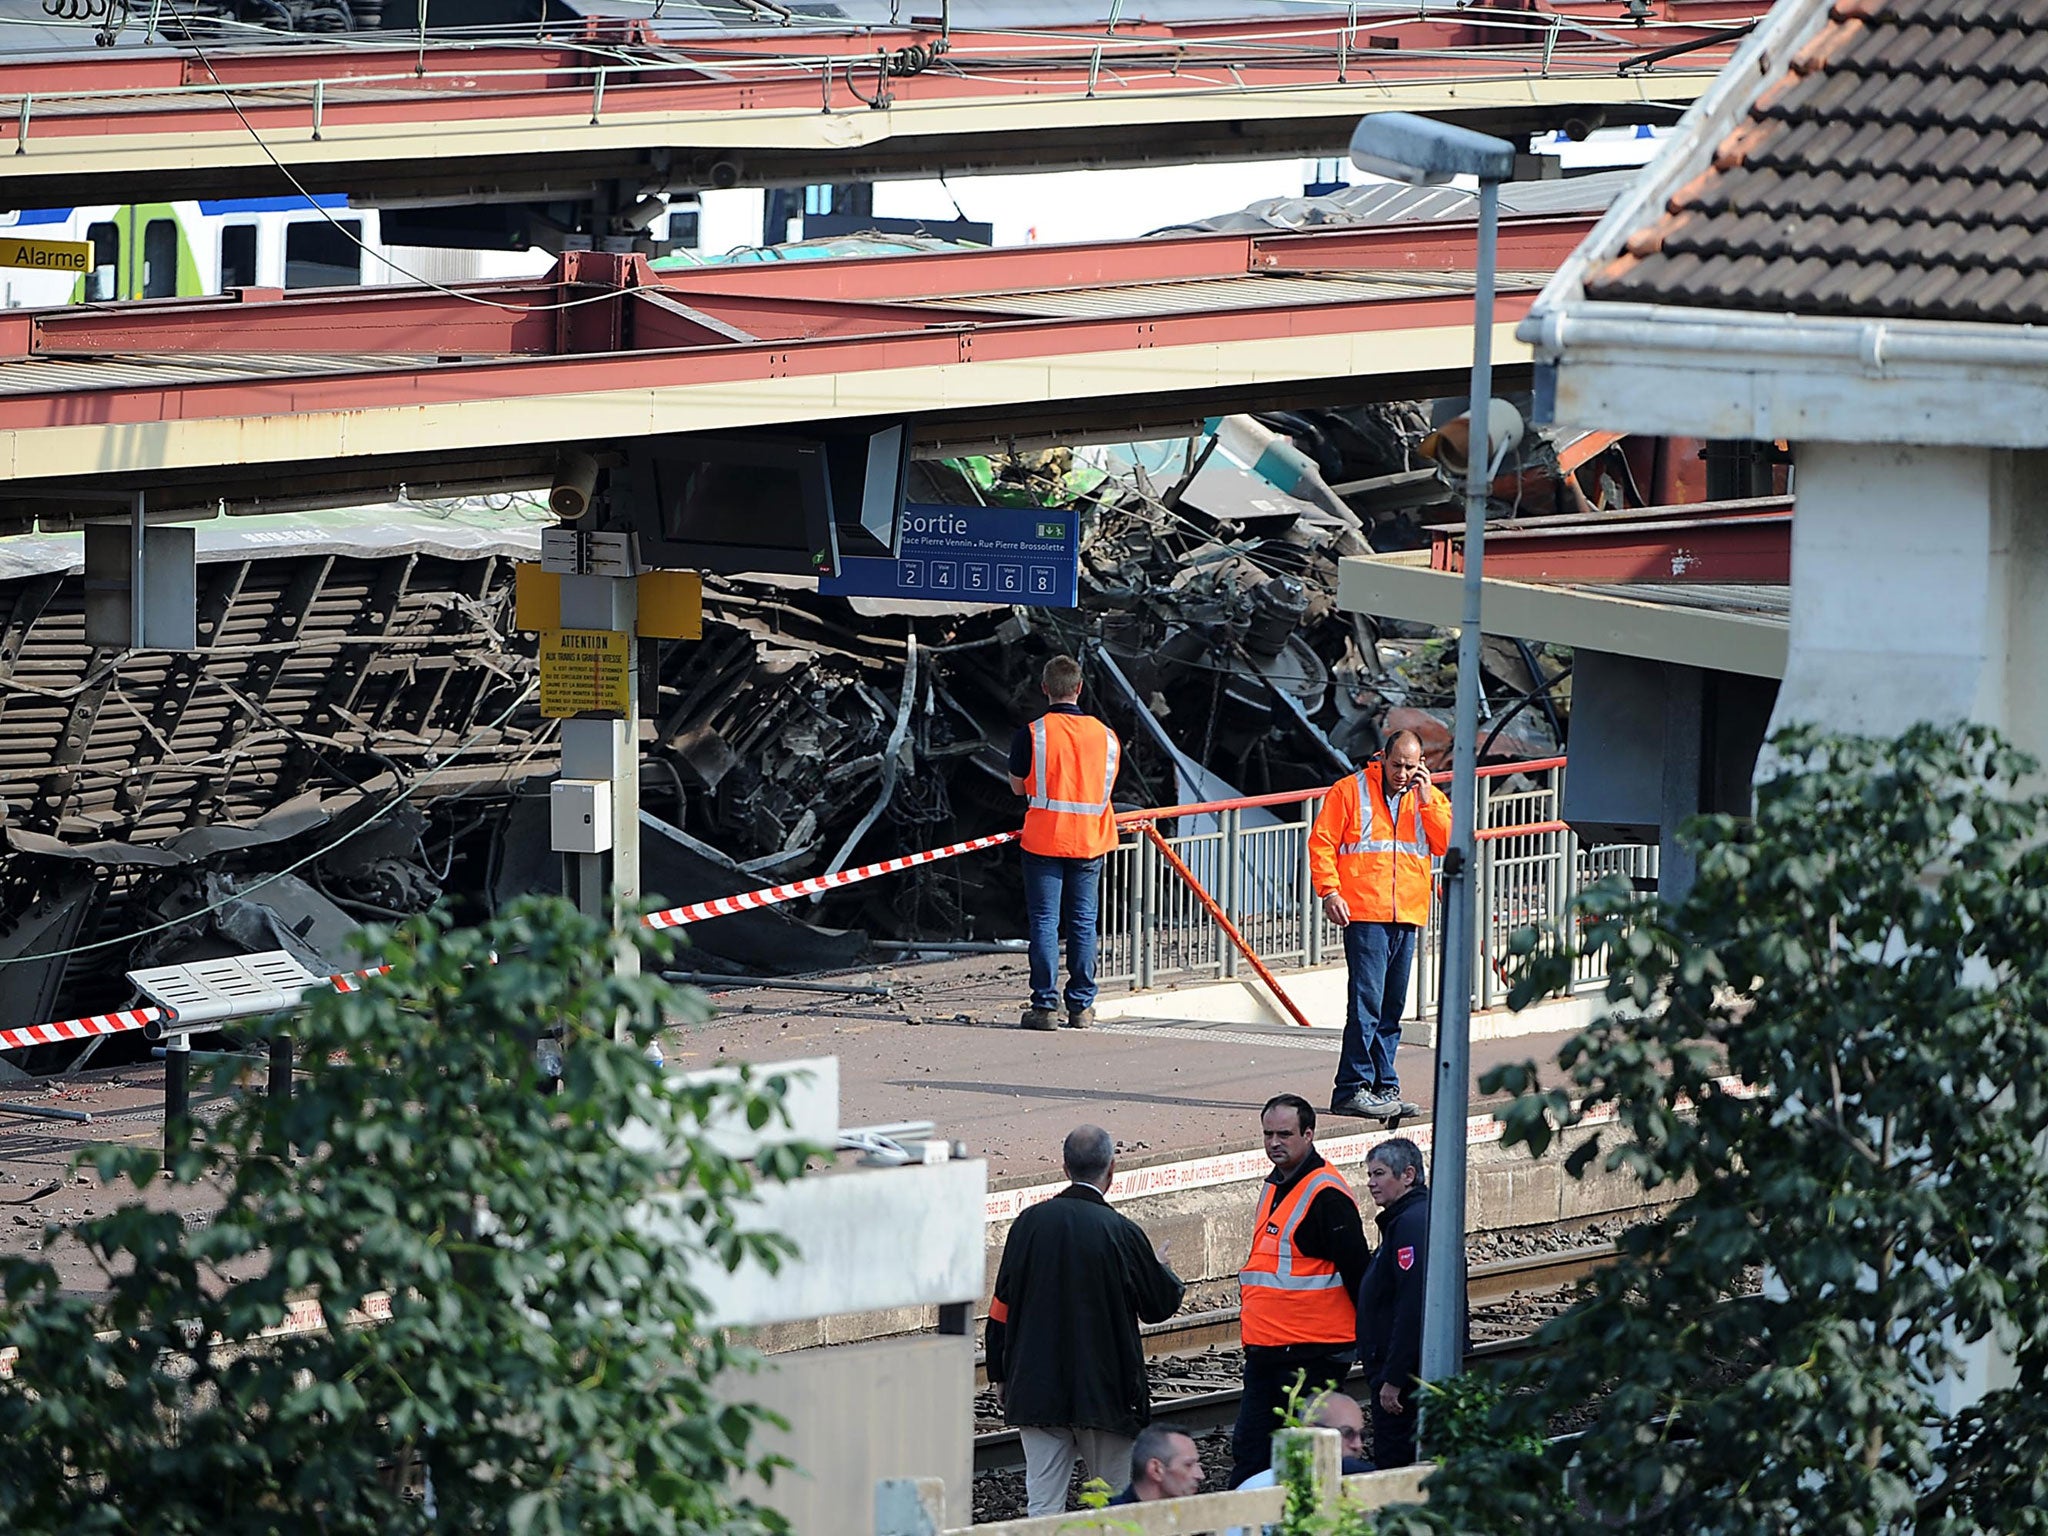 A scene from the derailment at Brétigny-sur-Orge, where a connecting bar on the track had become loose